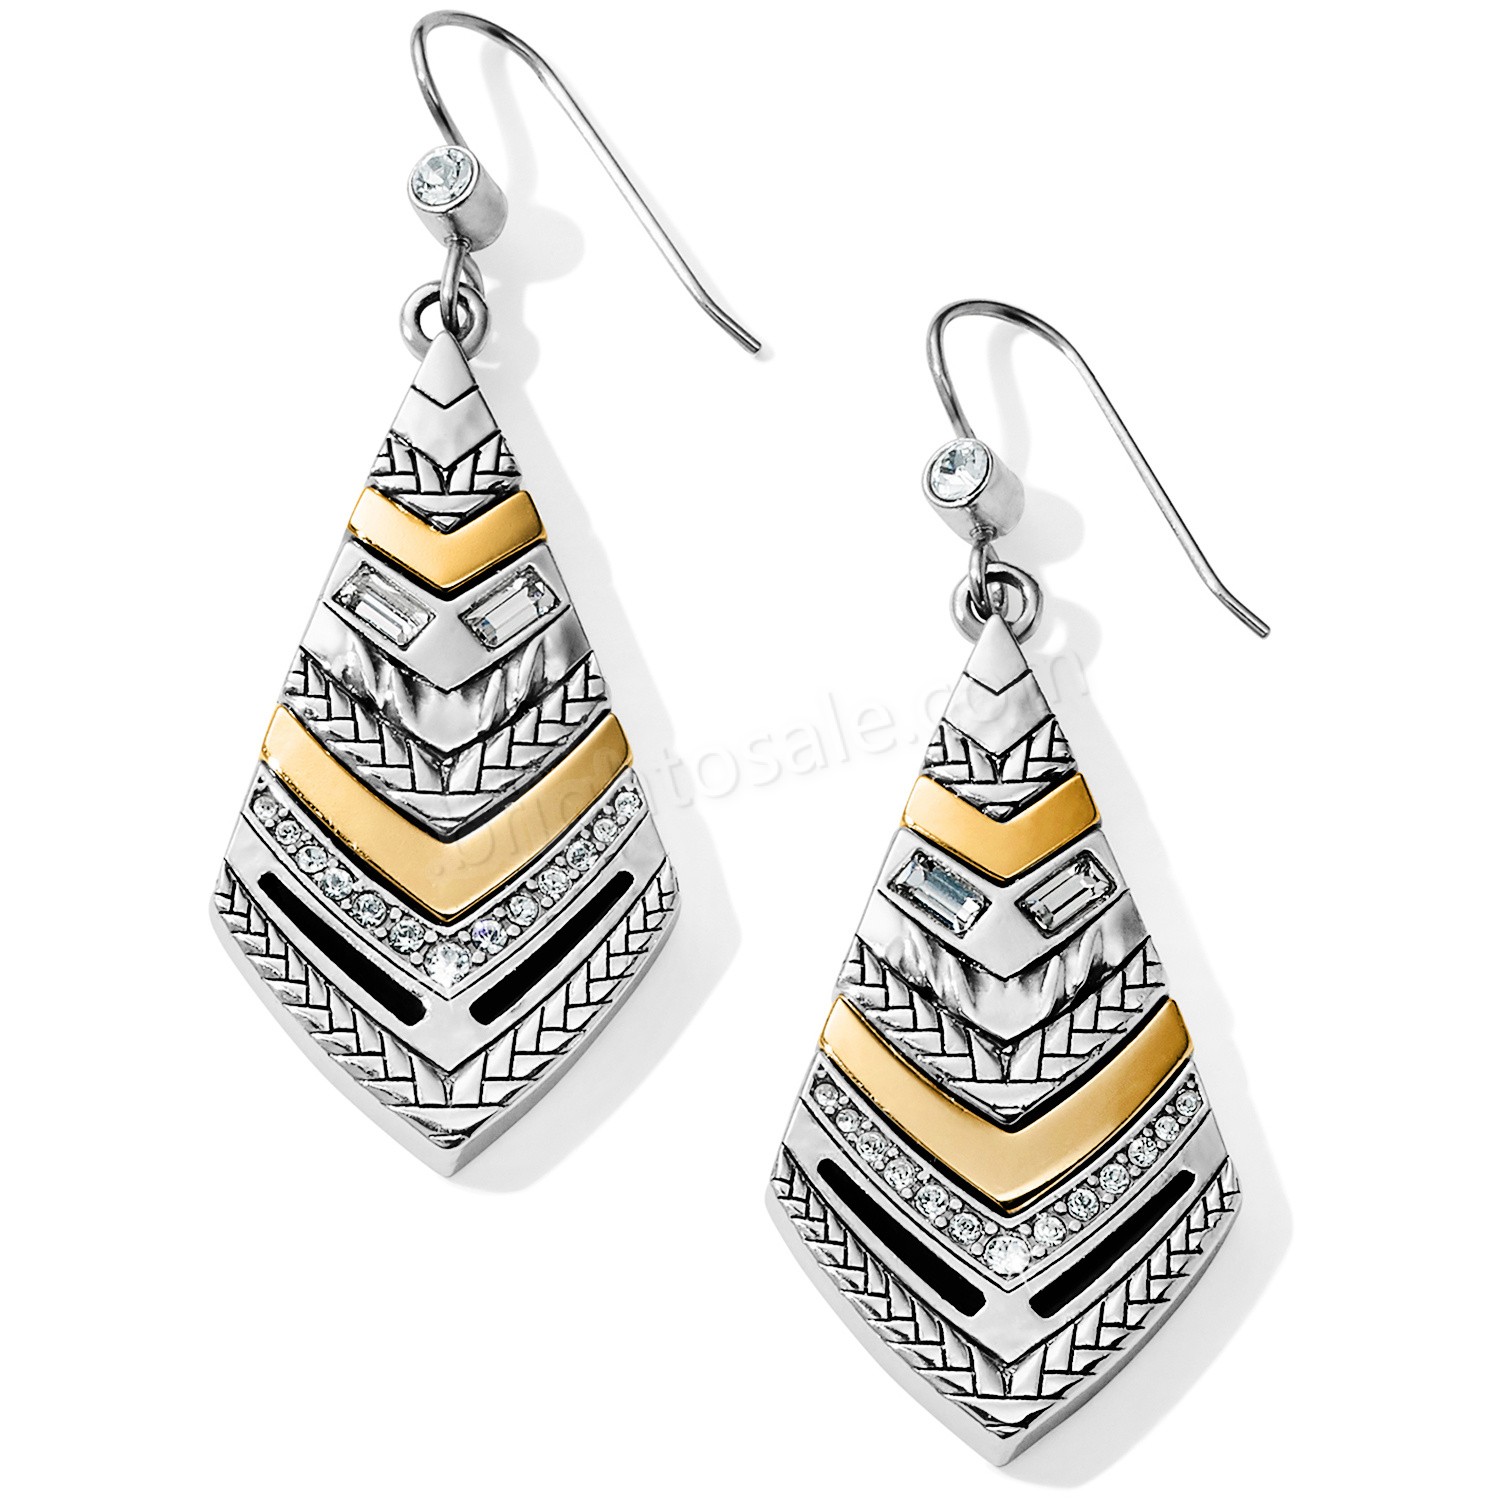 Brighton Collectibles & Online Discount Tapestry Kite French Wire Earrings - Brighton Collectibles & Online Discount Tapestry Kite French Wire Earrings